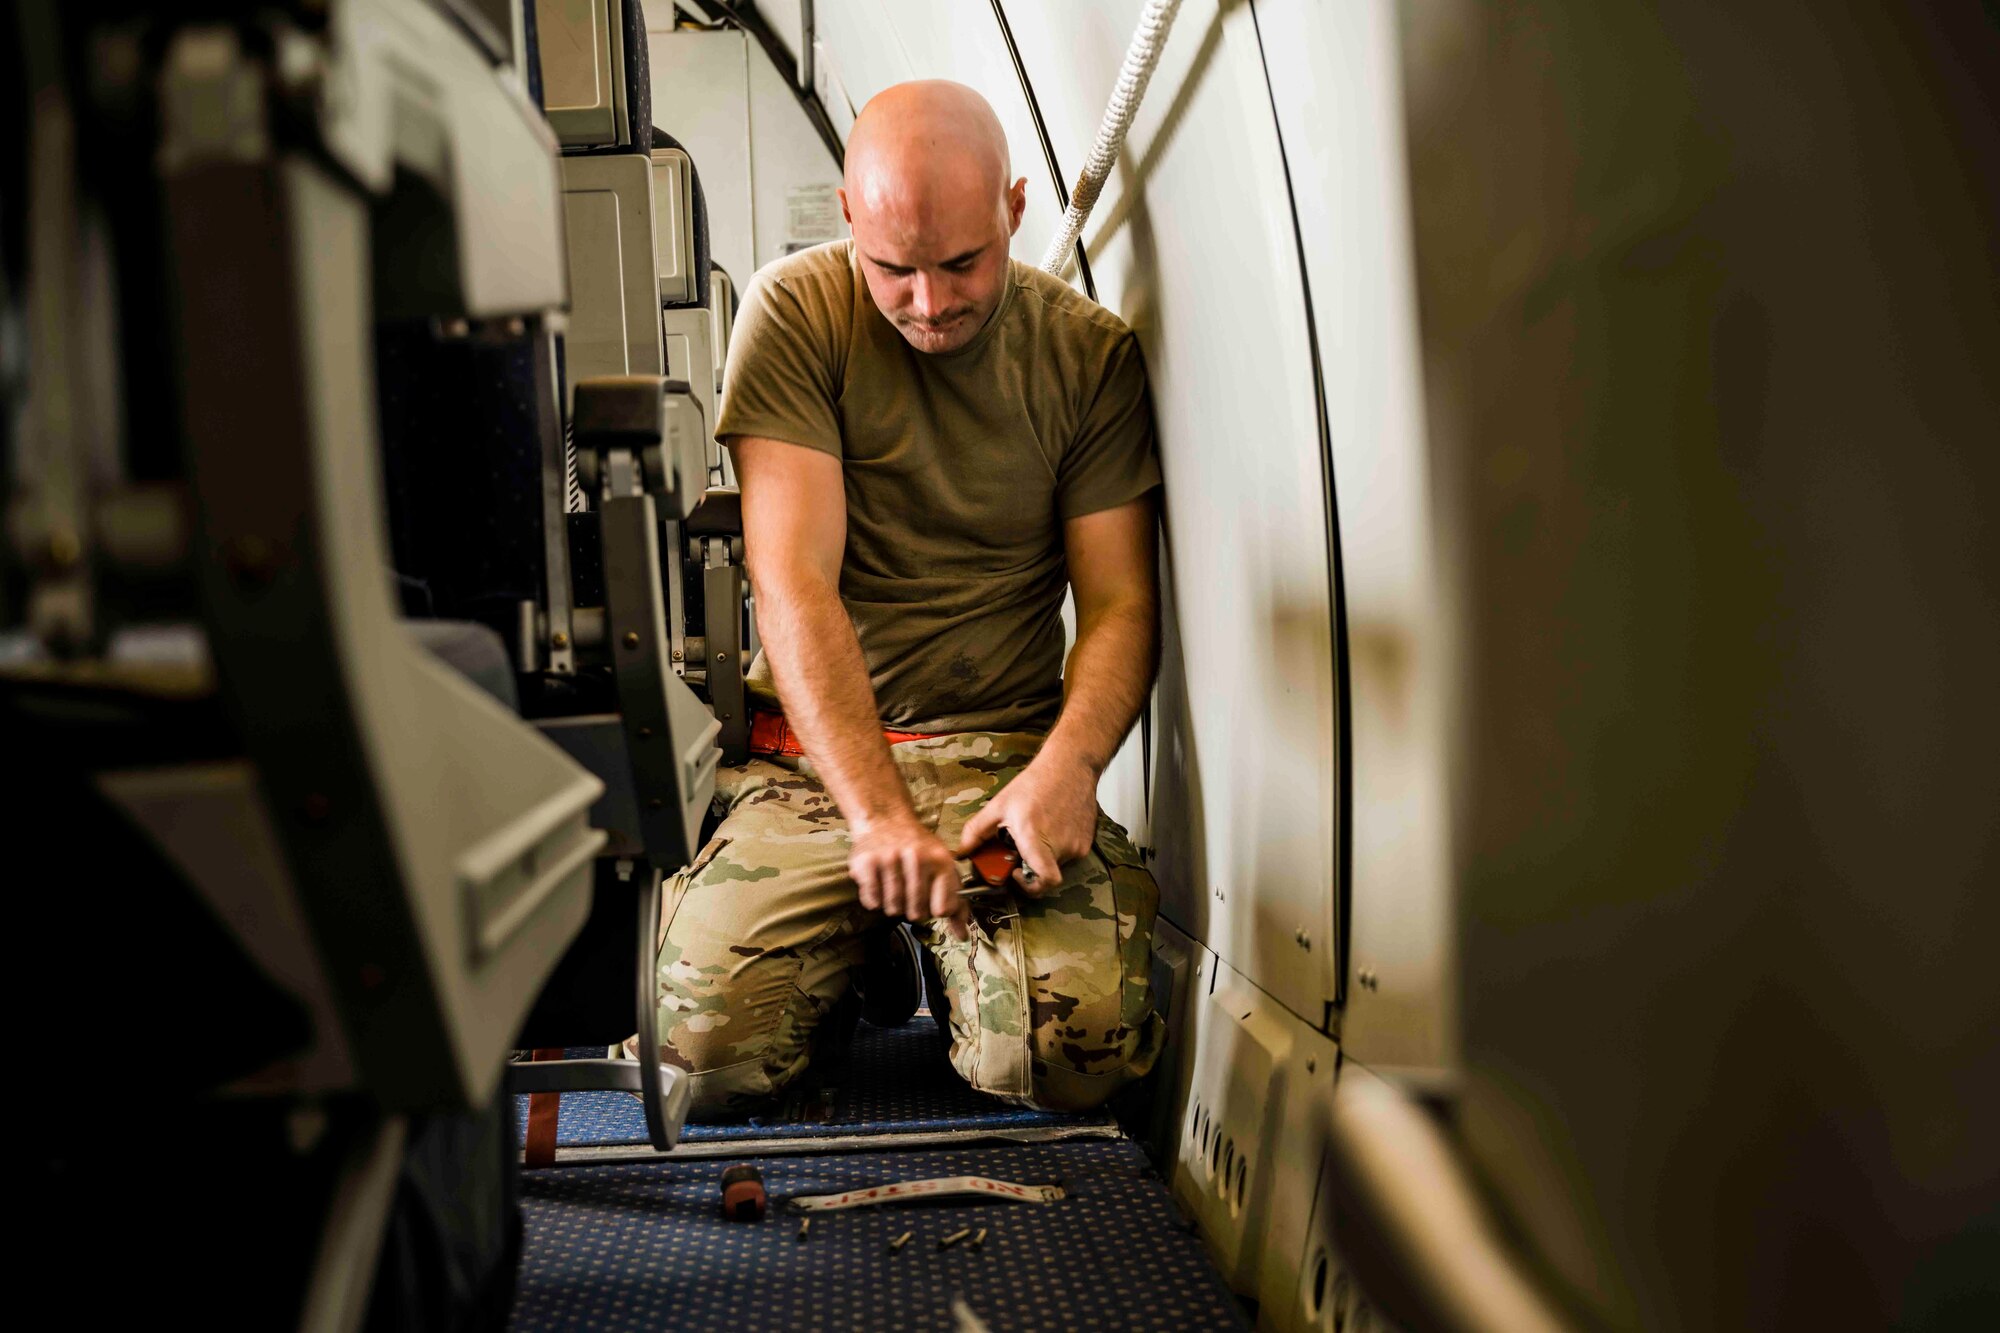 Airman works on flooring of aircraft cabin